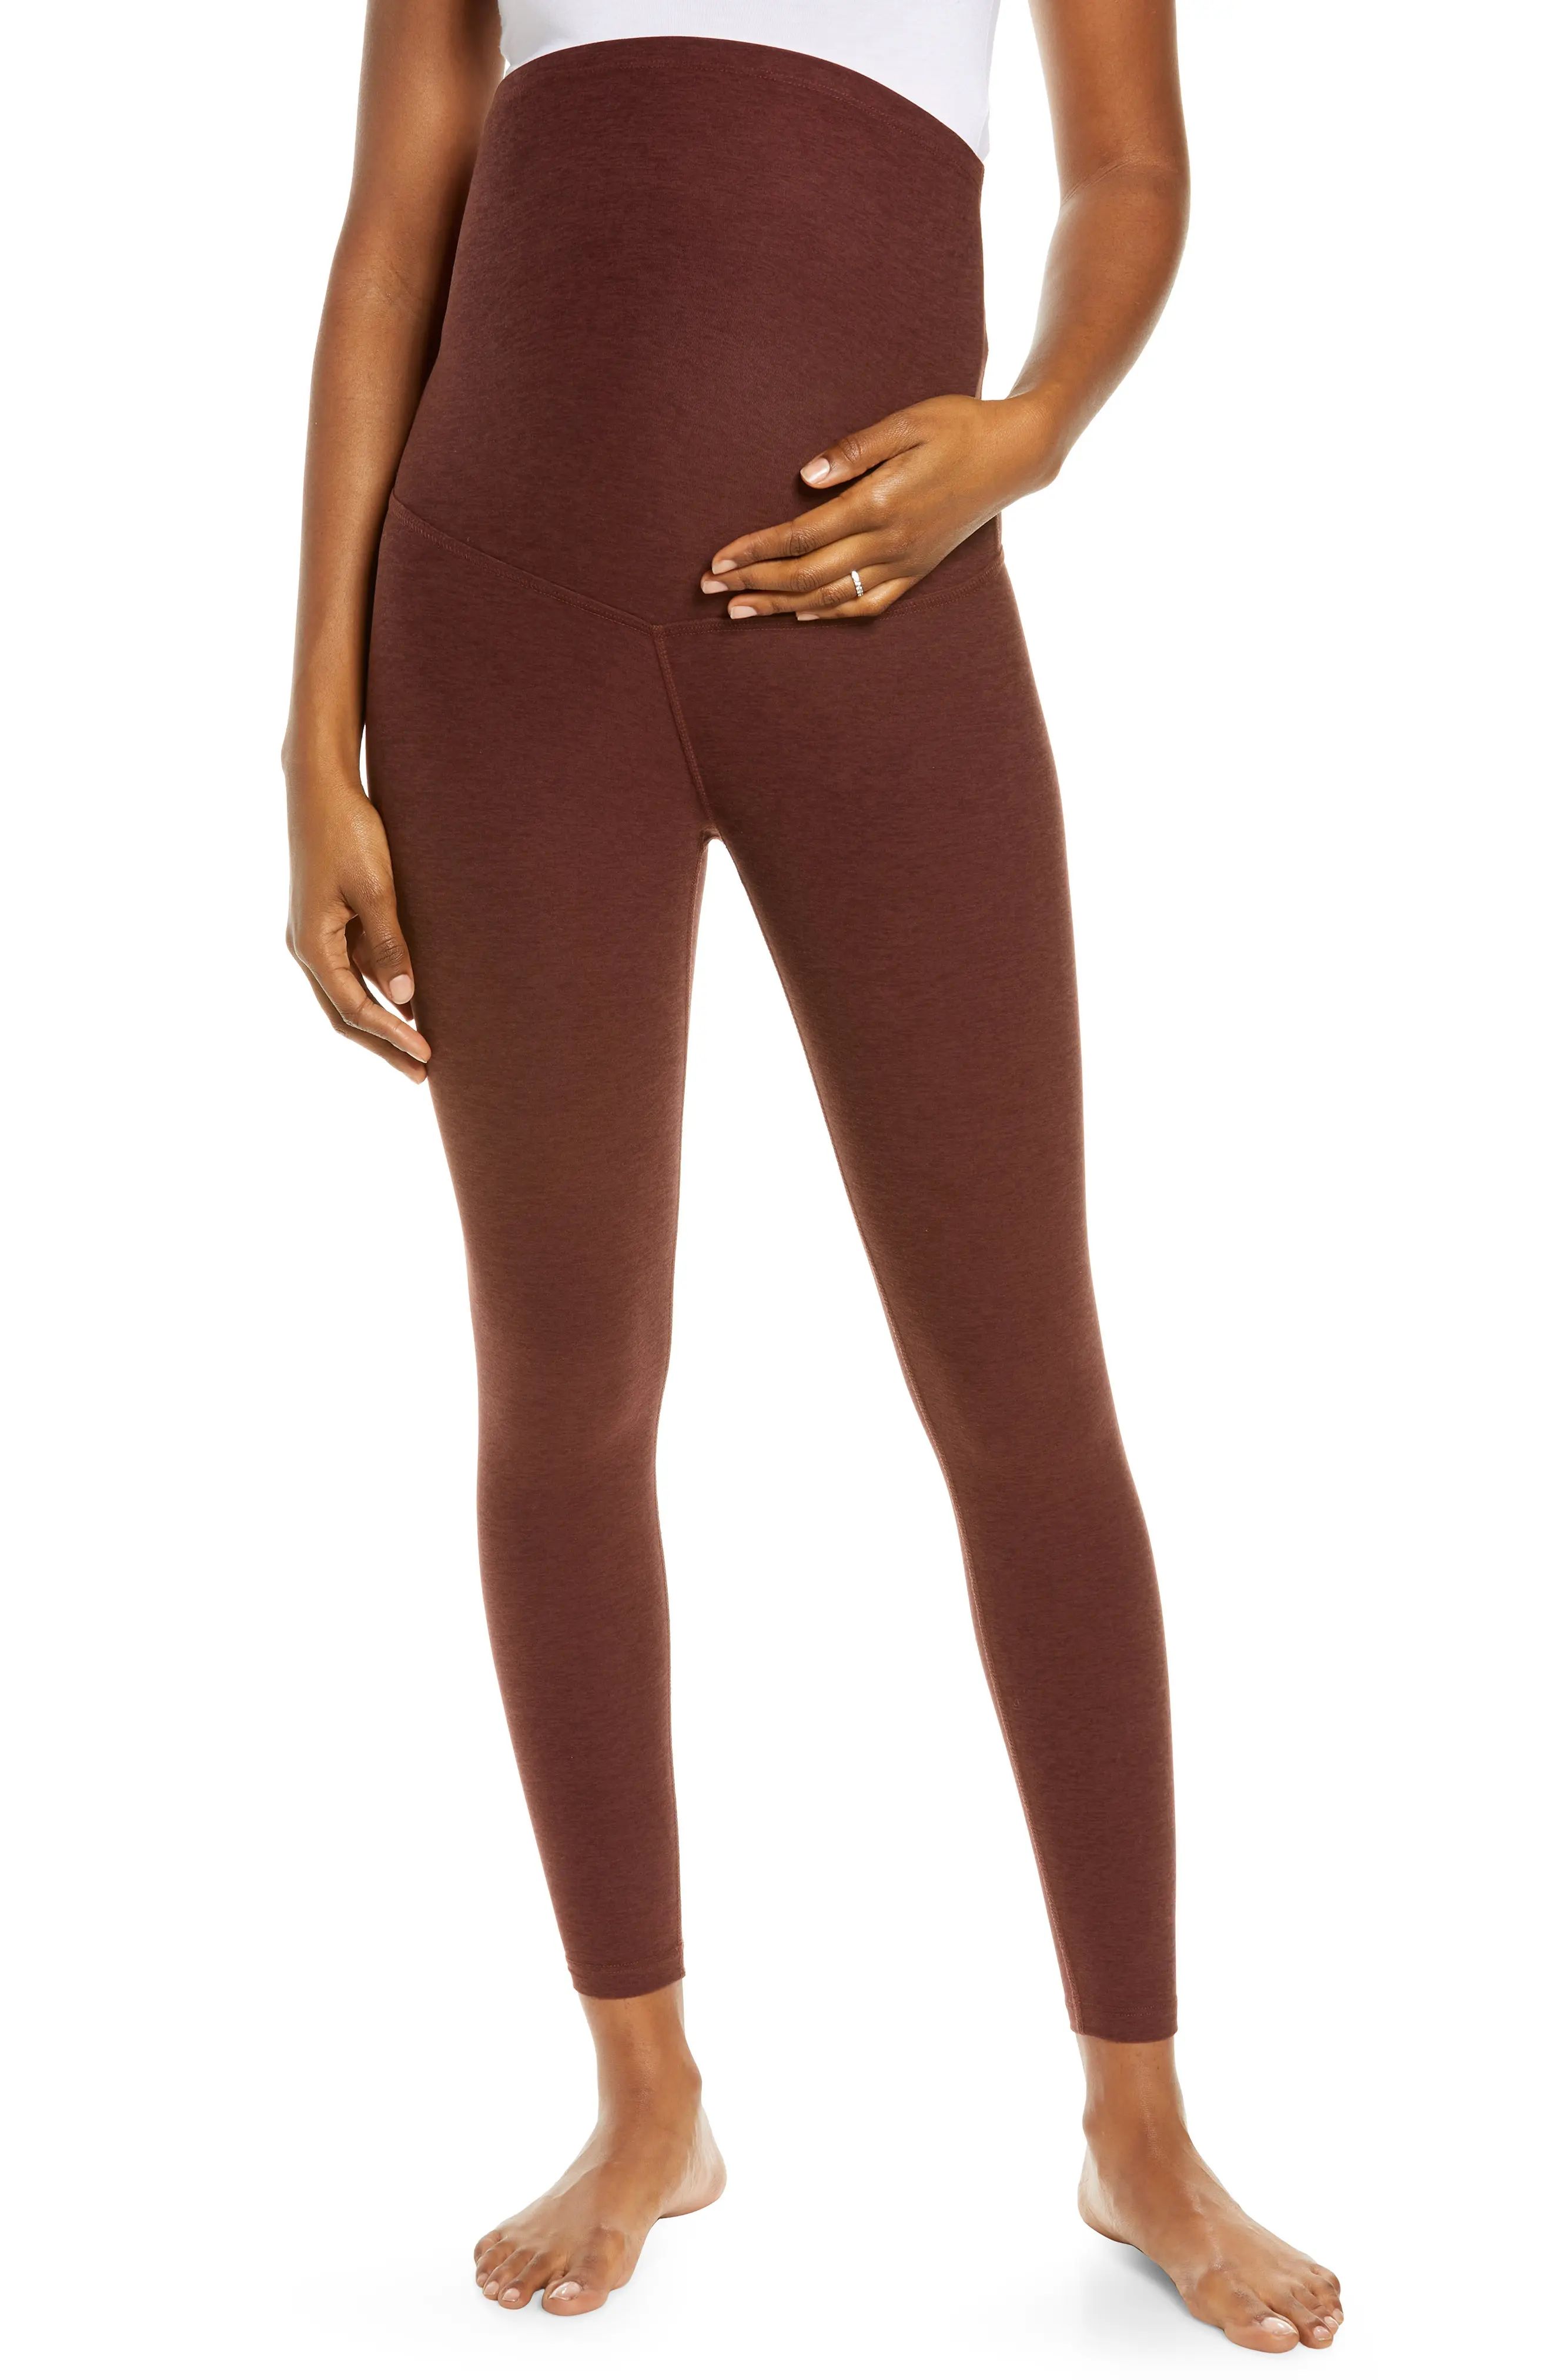 Beyond Yoga Empire Waist Maternity Leggings, Size Large in Mahogany Brown Heather at Nordstrom | Nordstrom